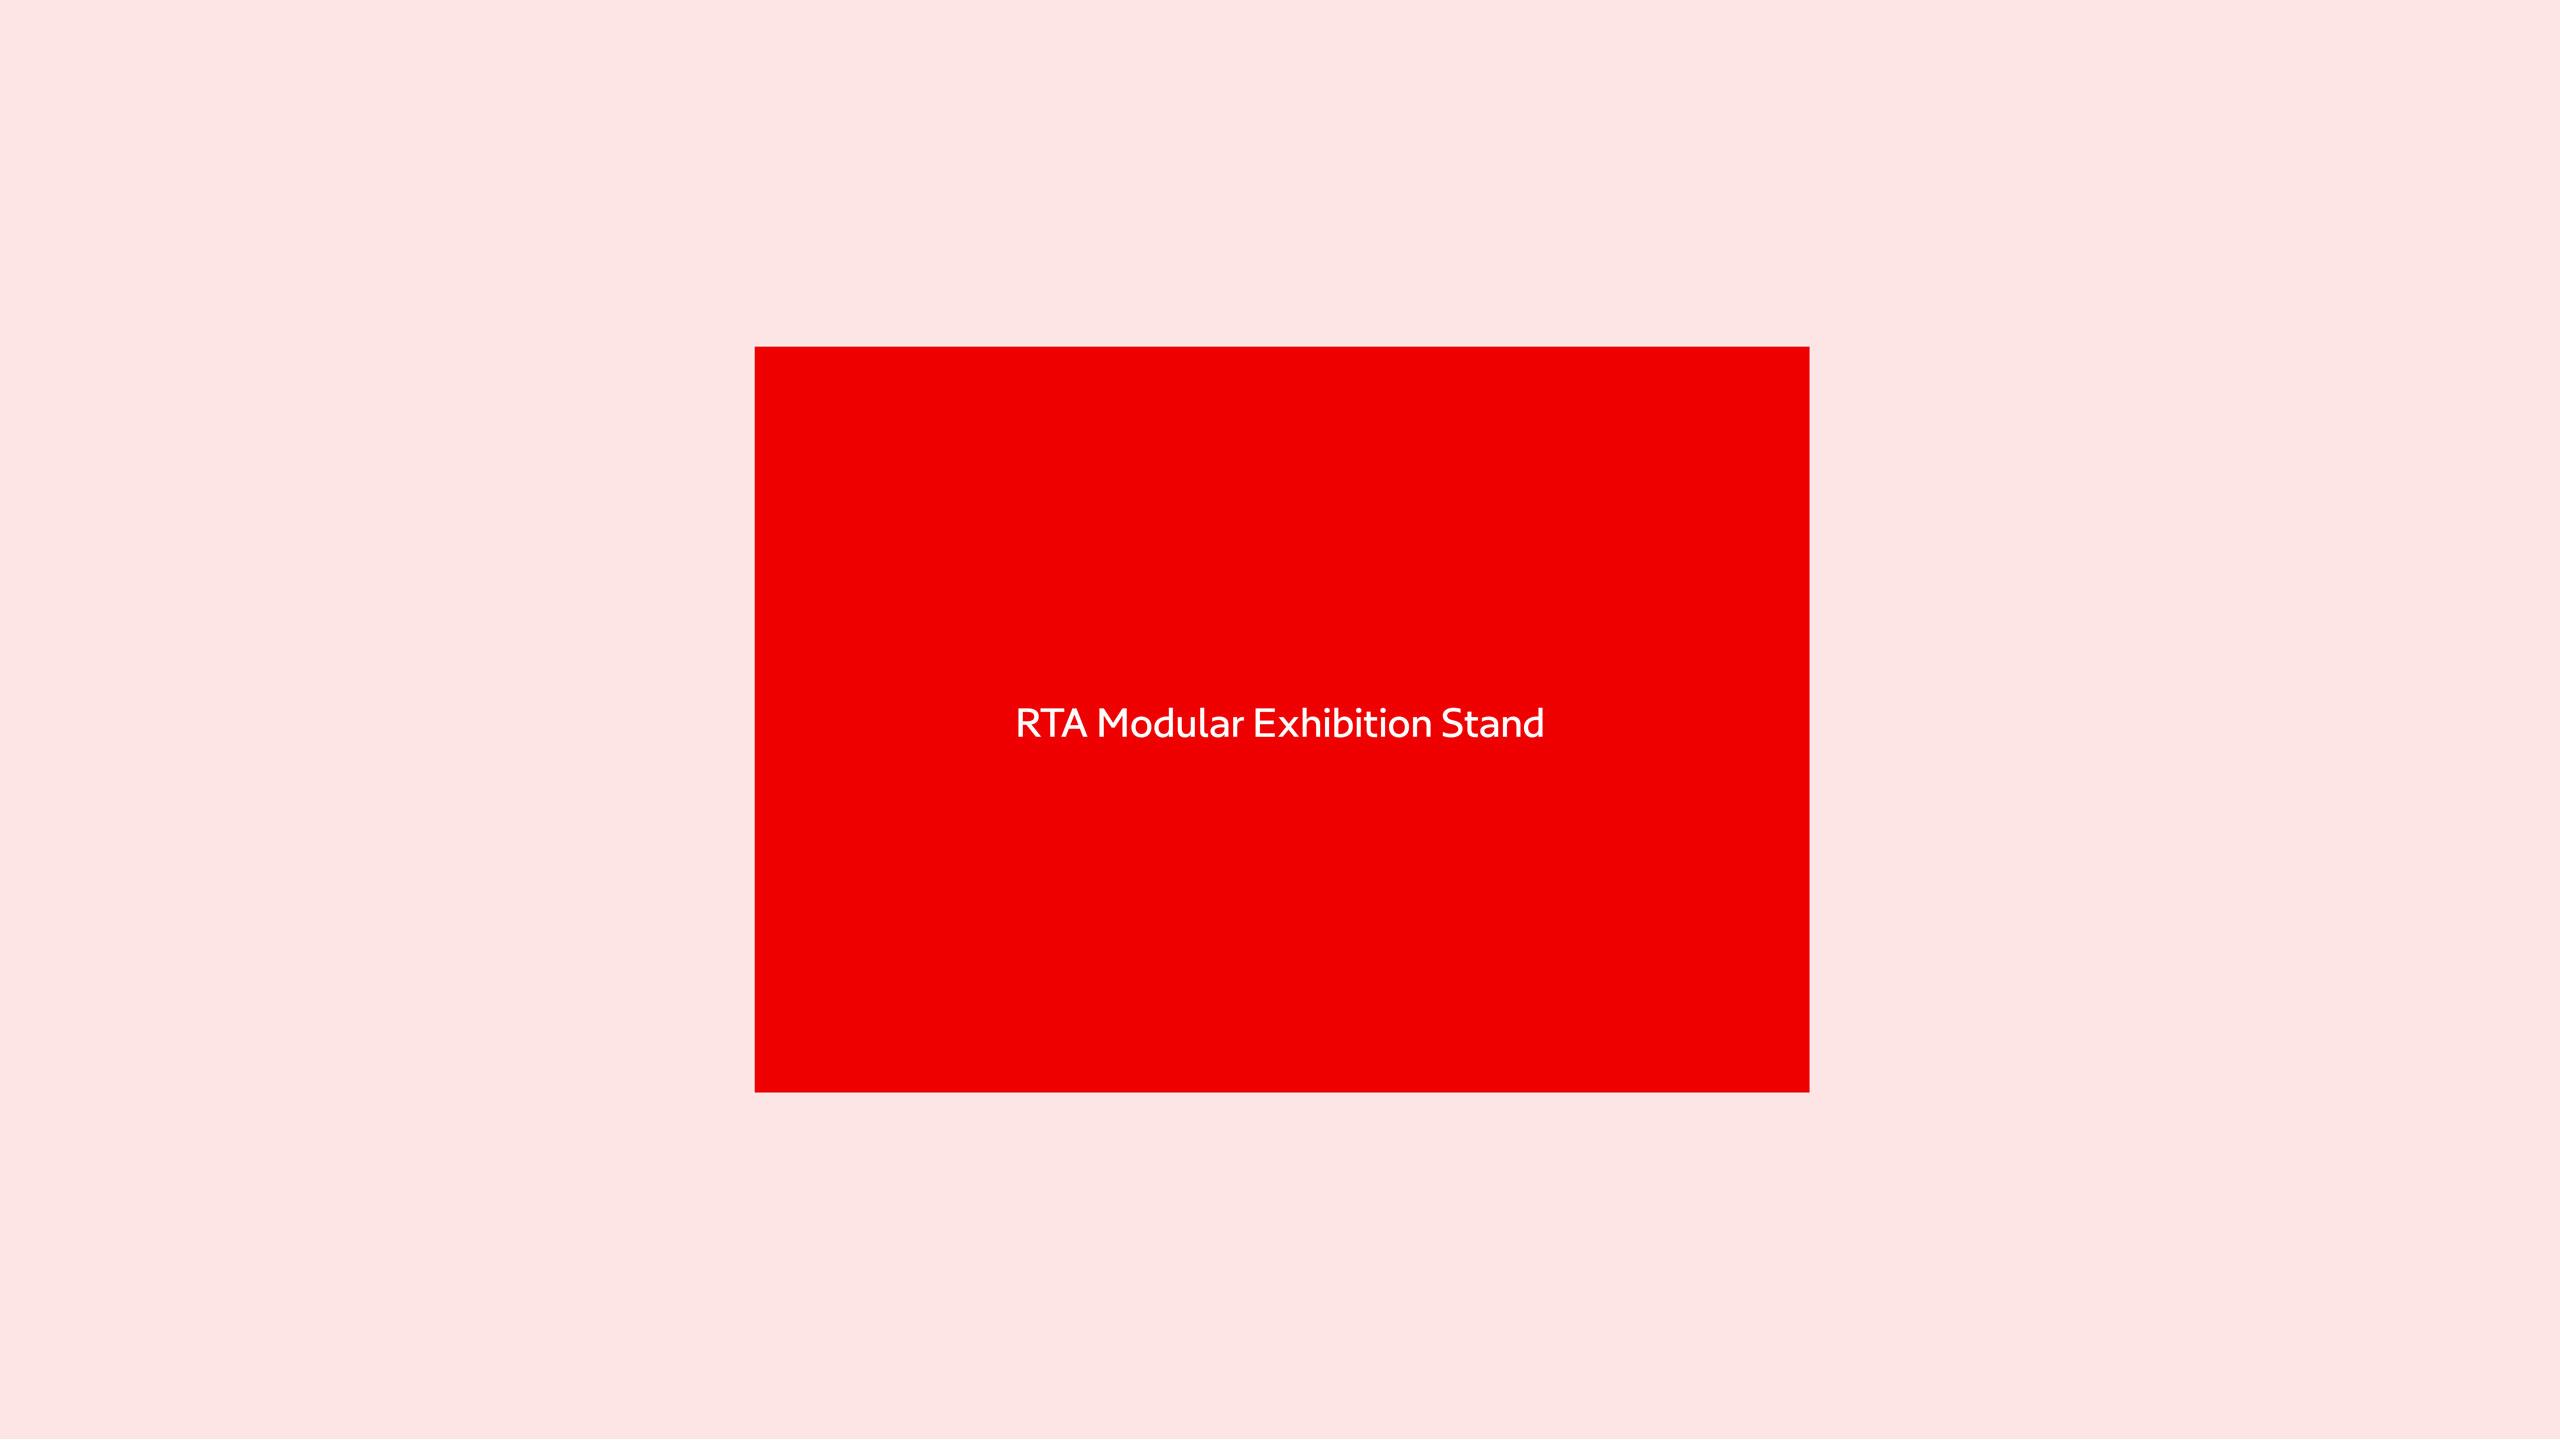 and so we design RTA Project Exhibition Image1